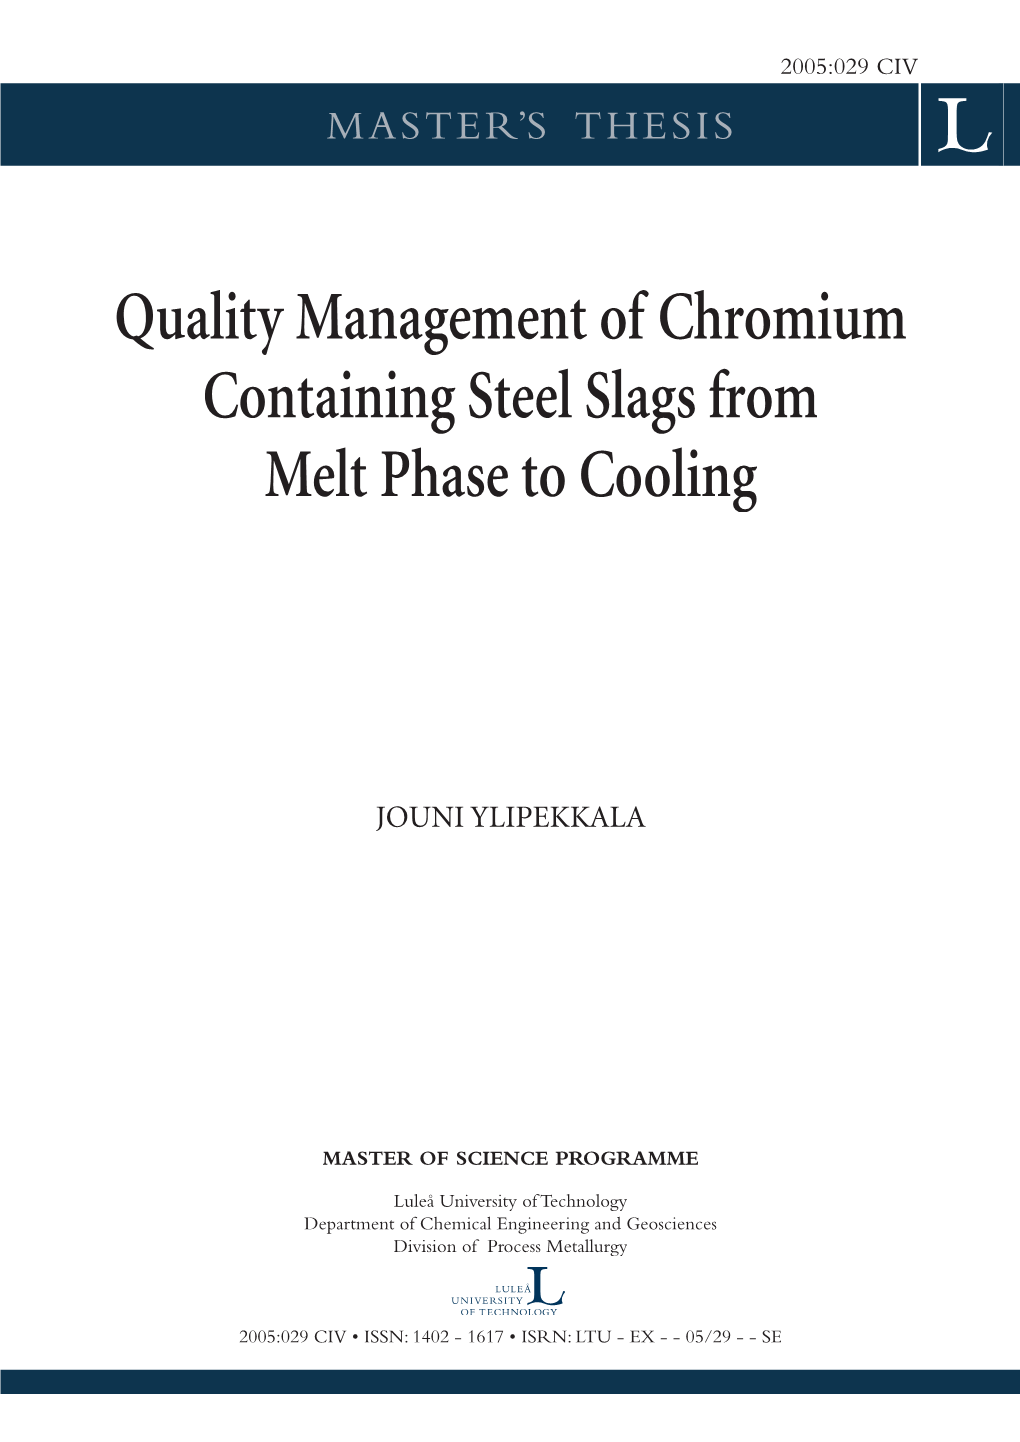 Quality Management of Chromium Containing Steel Slags from Melt Phase to Cooling